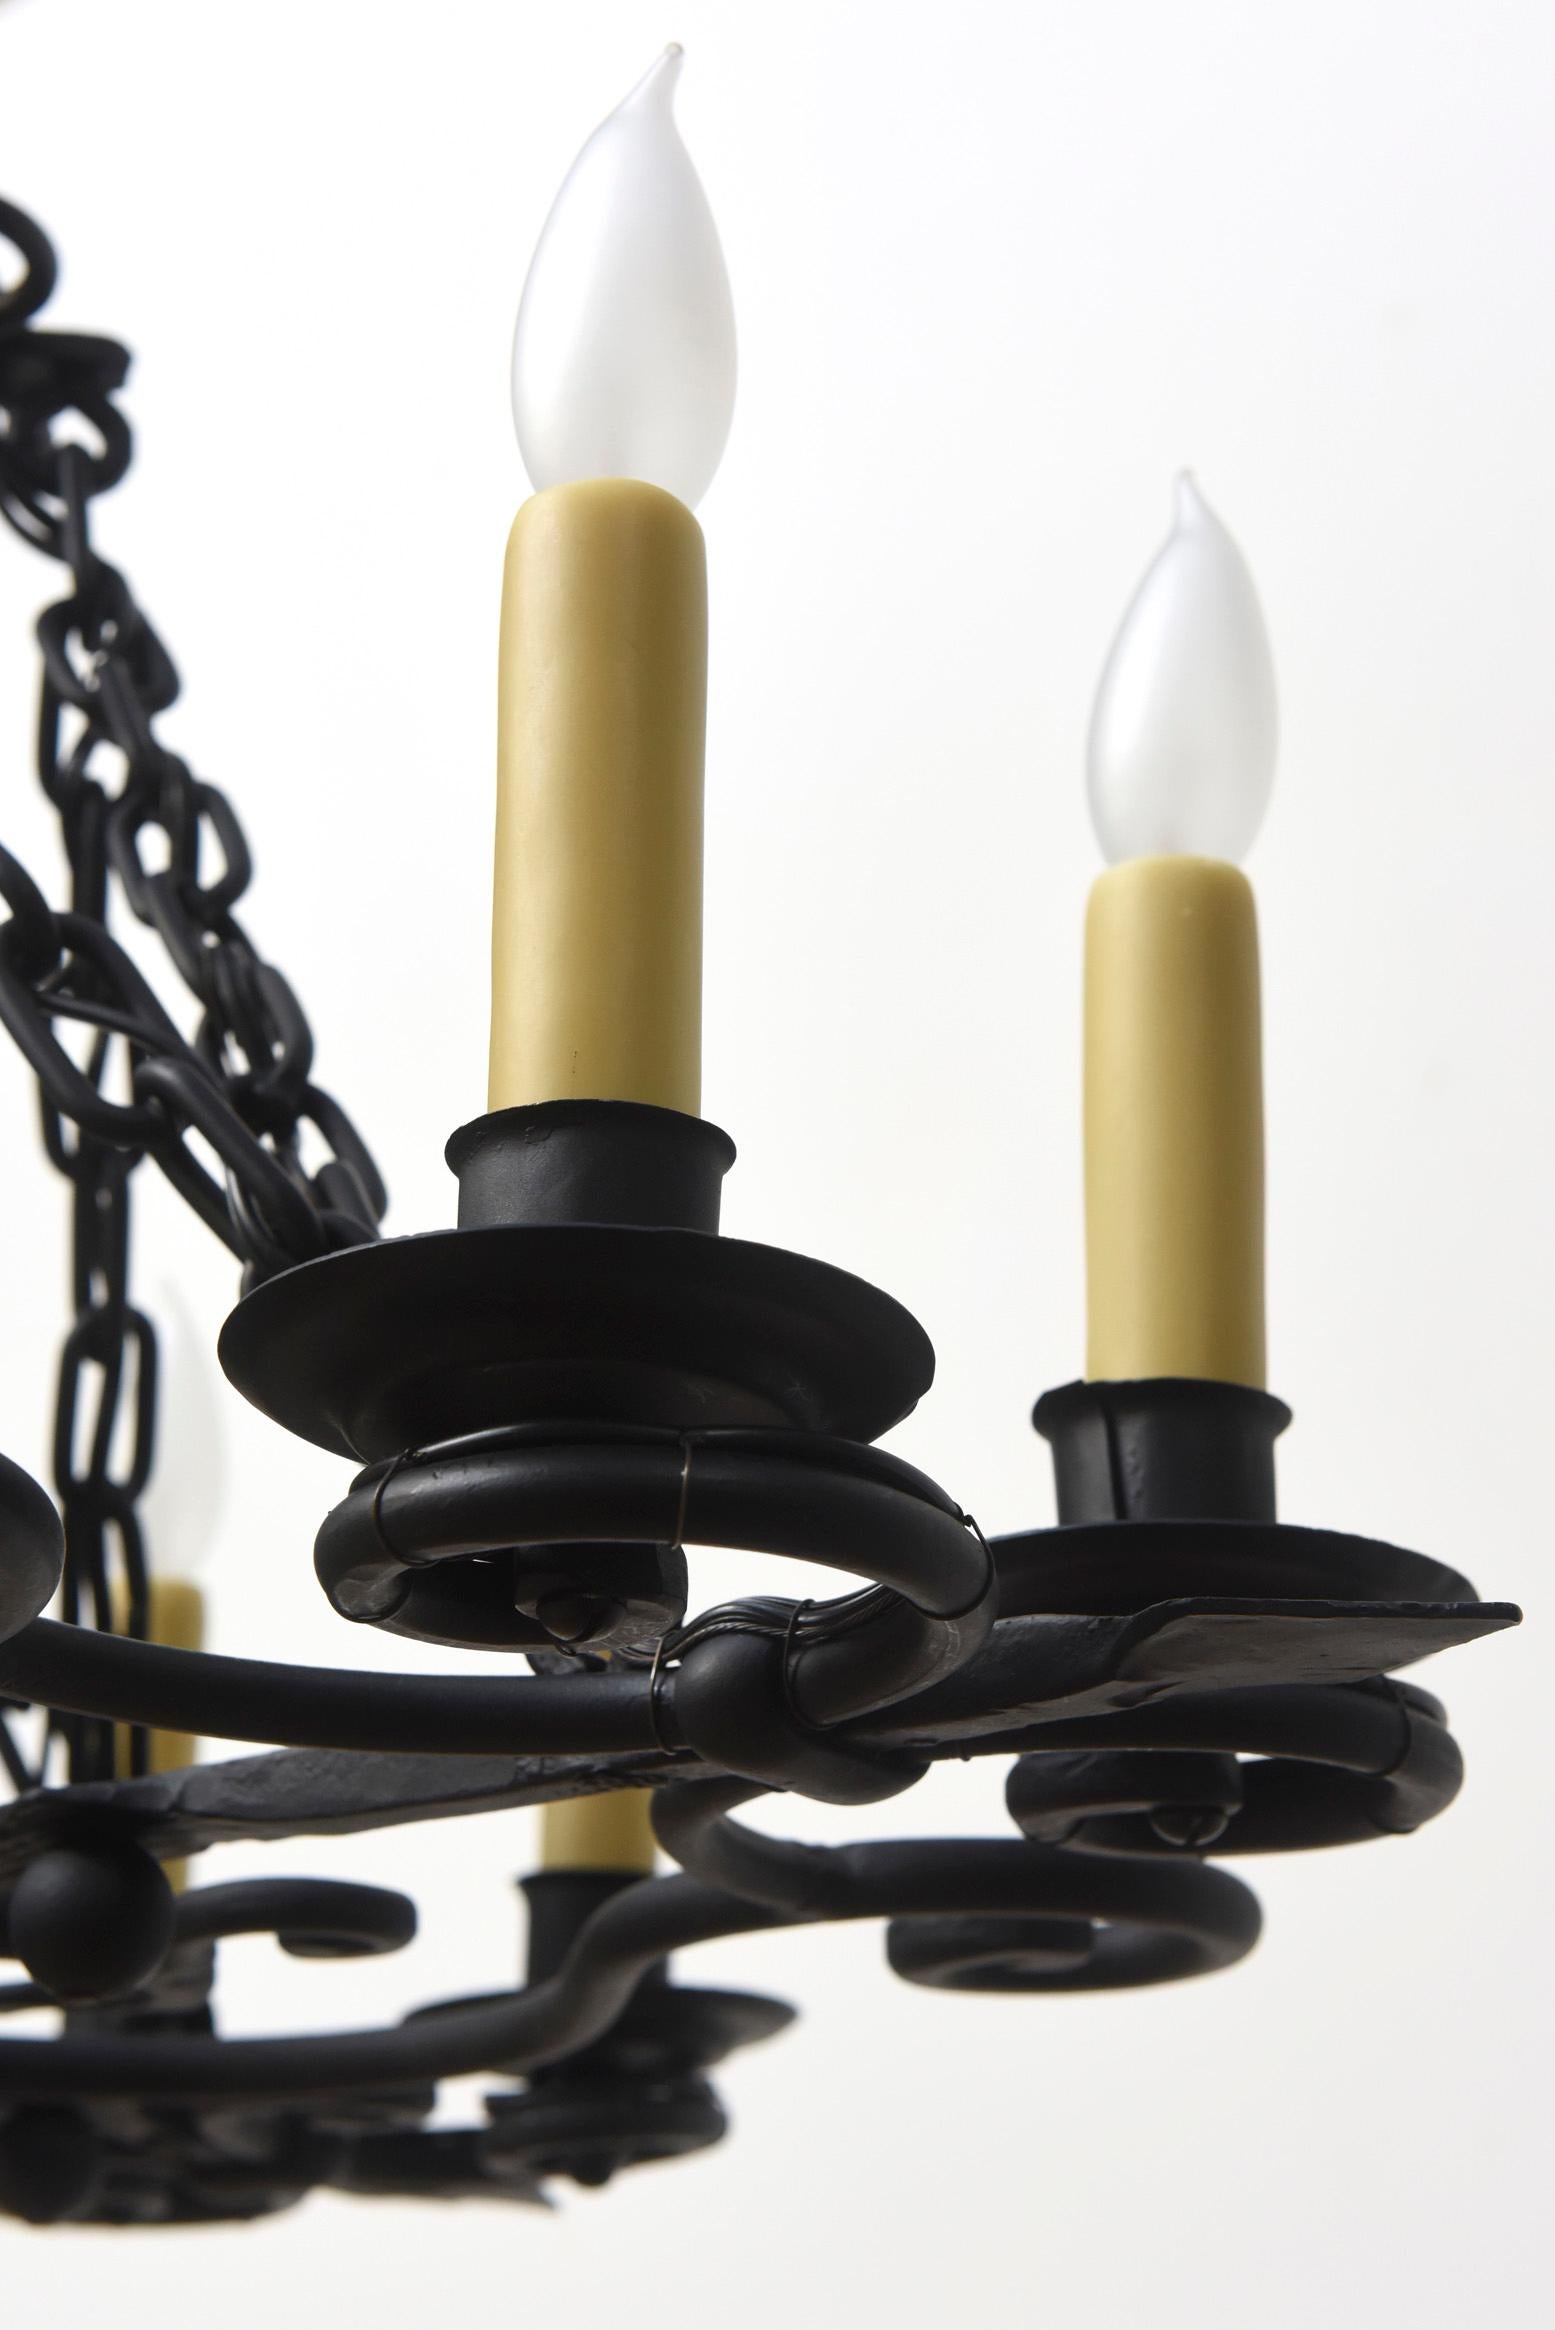 wrought iron candle chandeliers